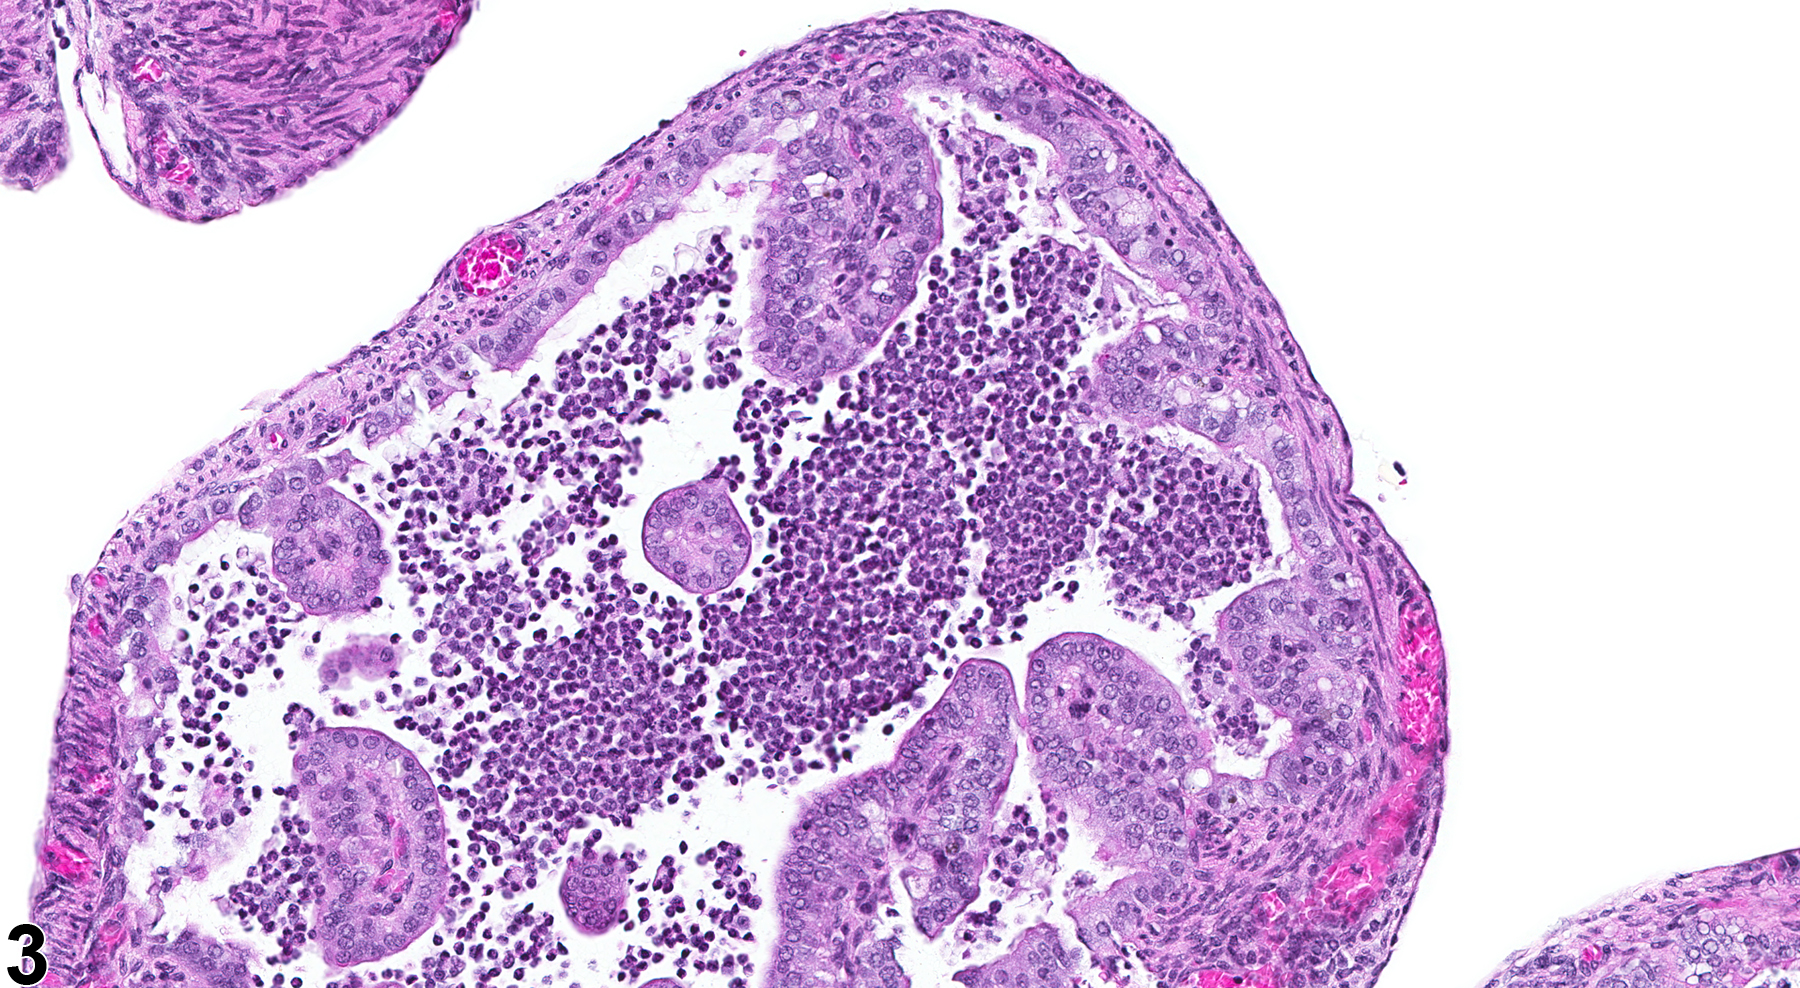 Image of inflammation in the oviduct from a female B6C3F1 mouse in a chronic study